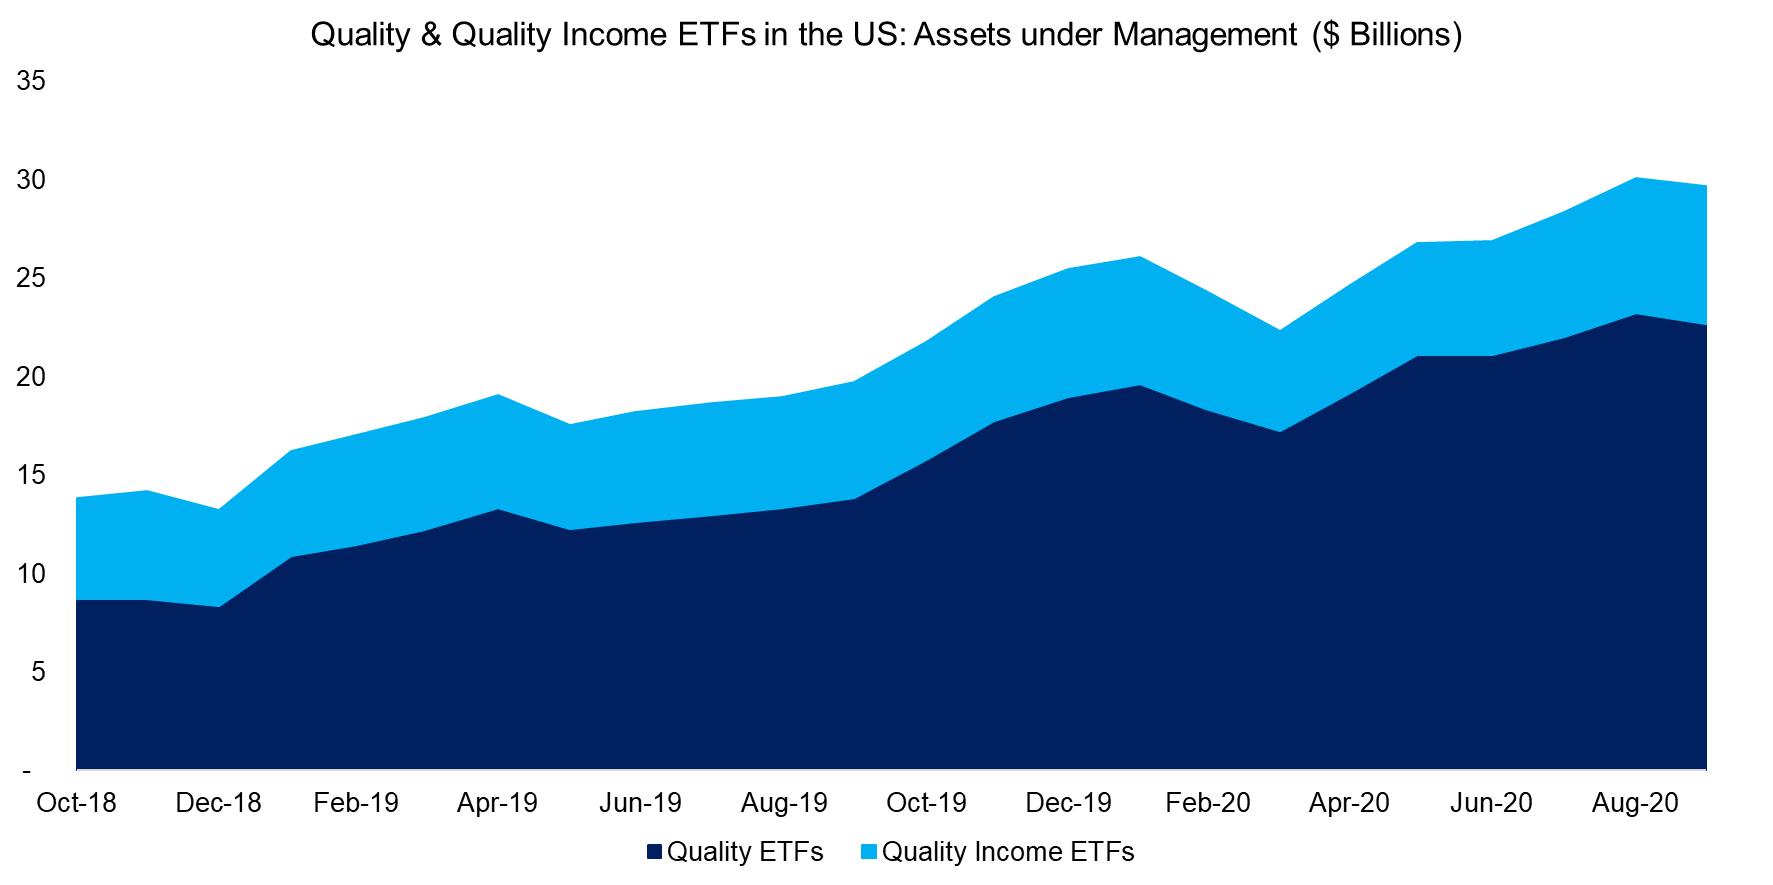 Quality & Quality Income ETFs in the US Assets under Management ($ Billions)